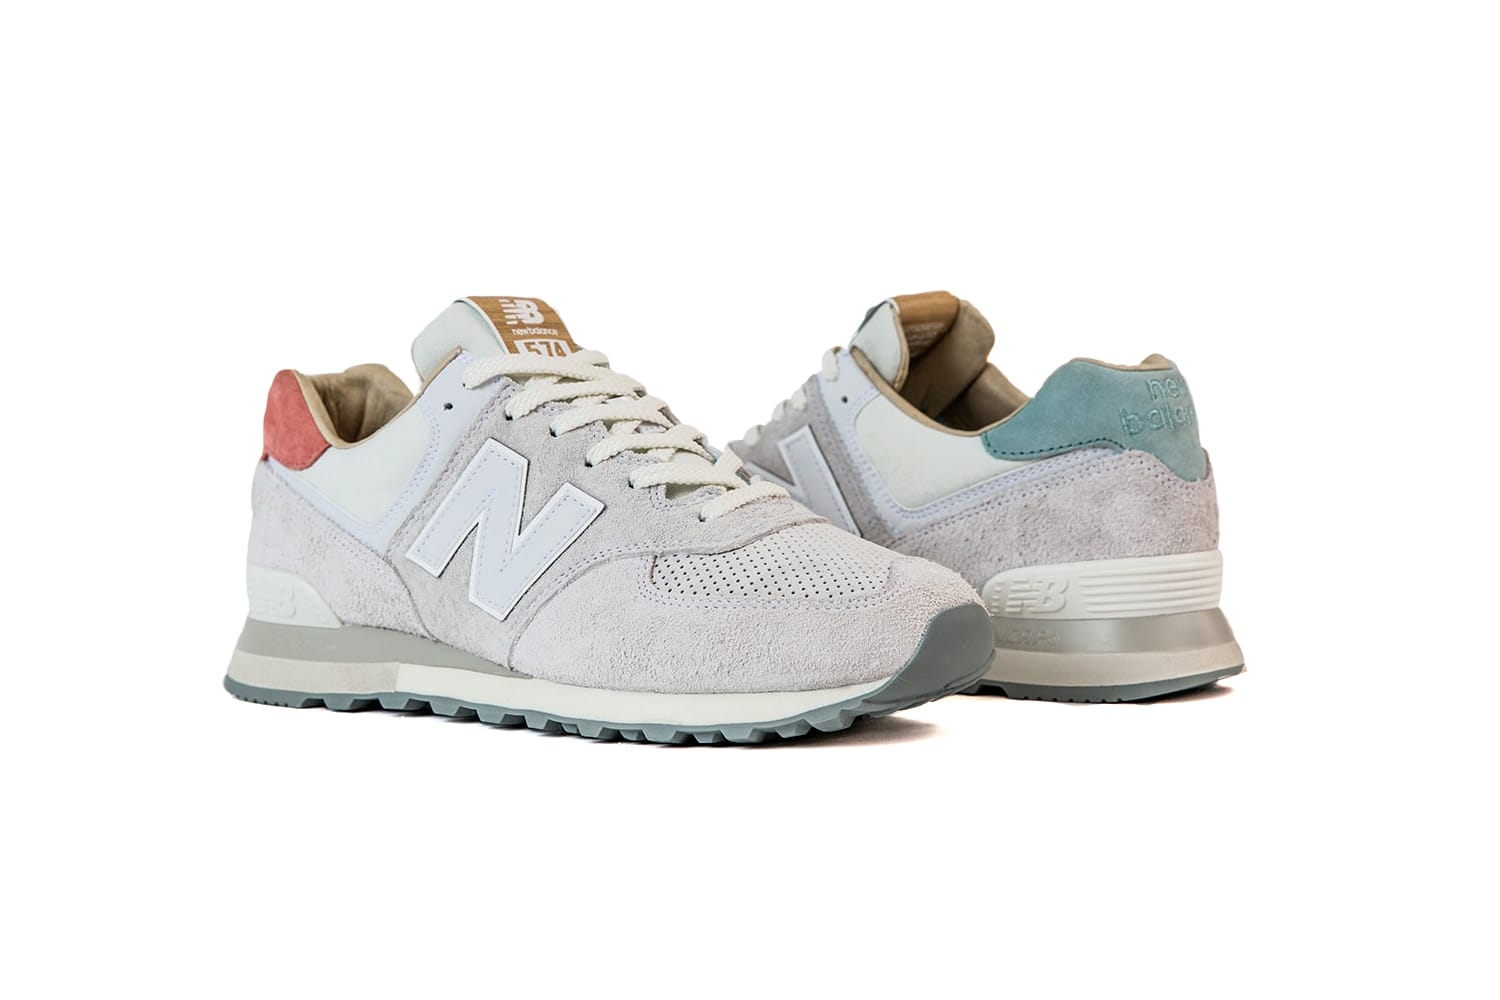 New Balance 574 PEAK TO THE STREETS Release Info | HYPEBEAST